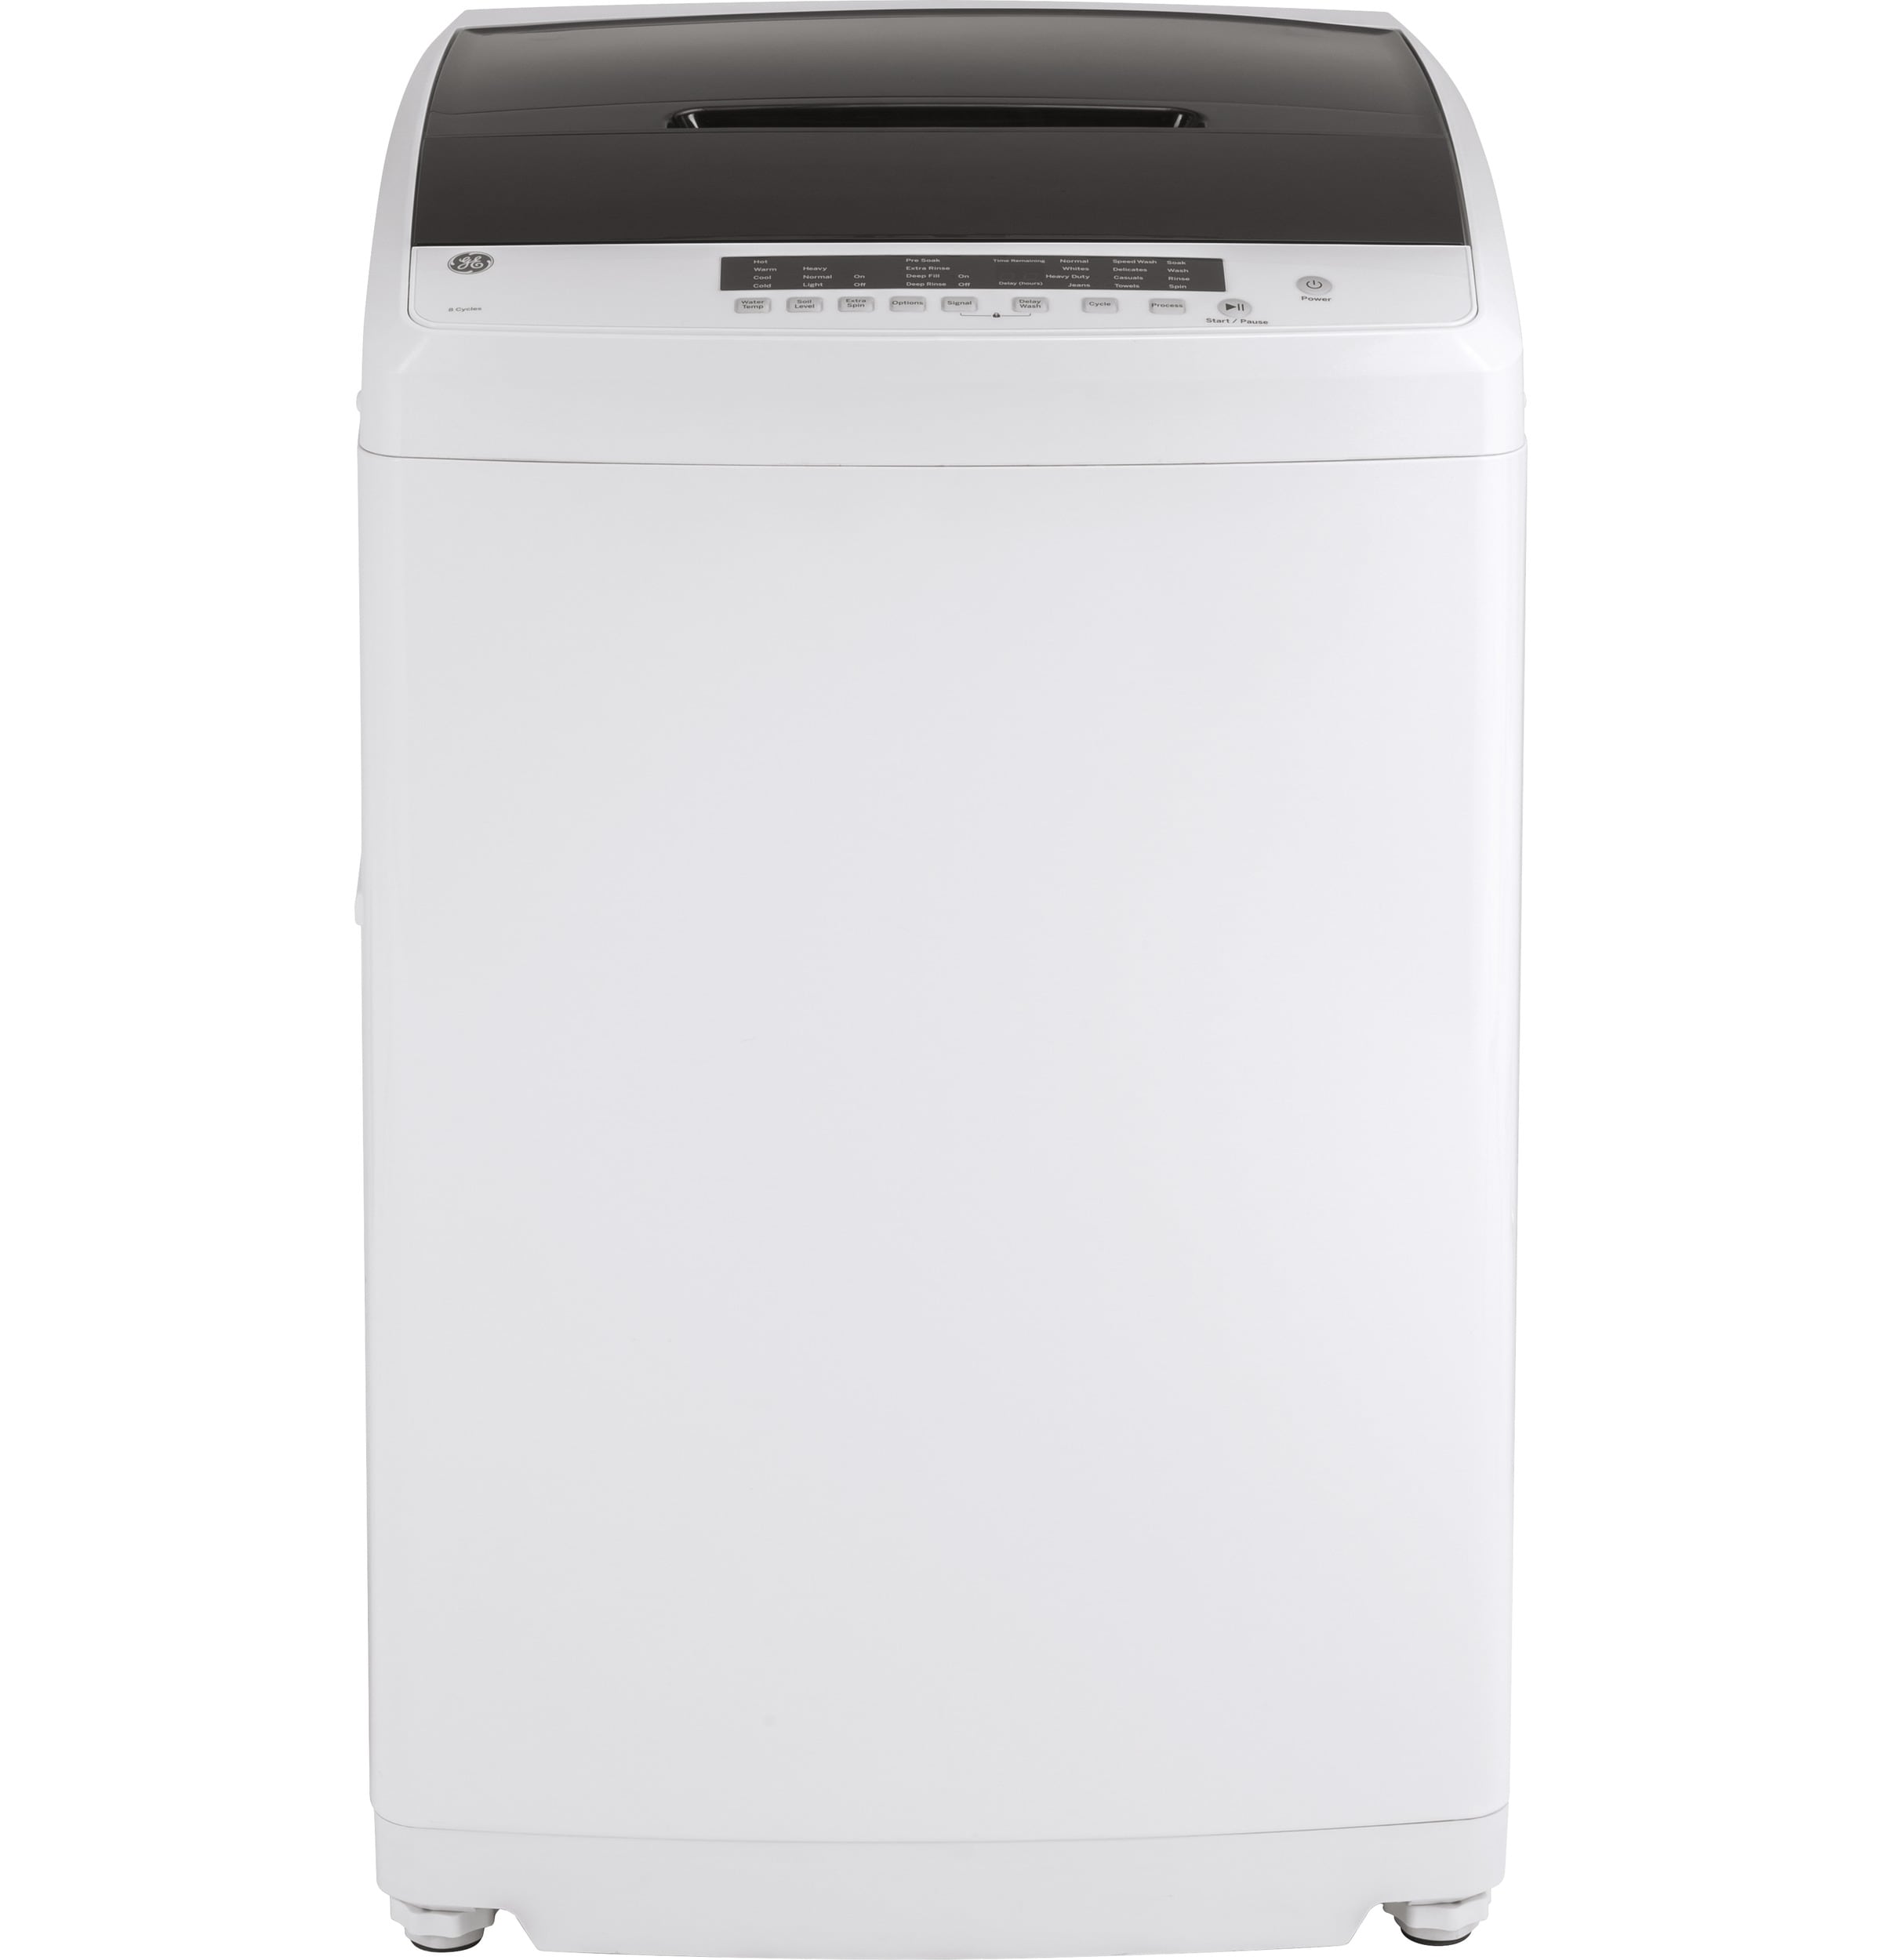 Best Mini Washer and Dryer. Comfee 1.6 Cu.Ft Portable Washing Machine  Review 2021 